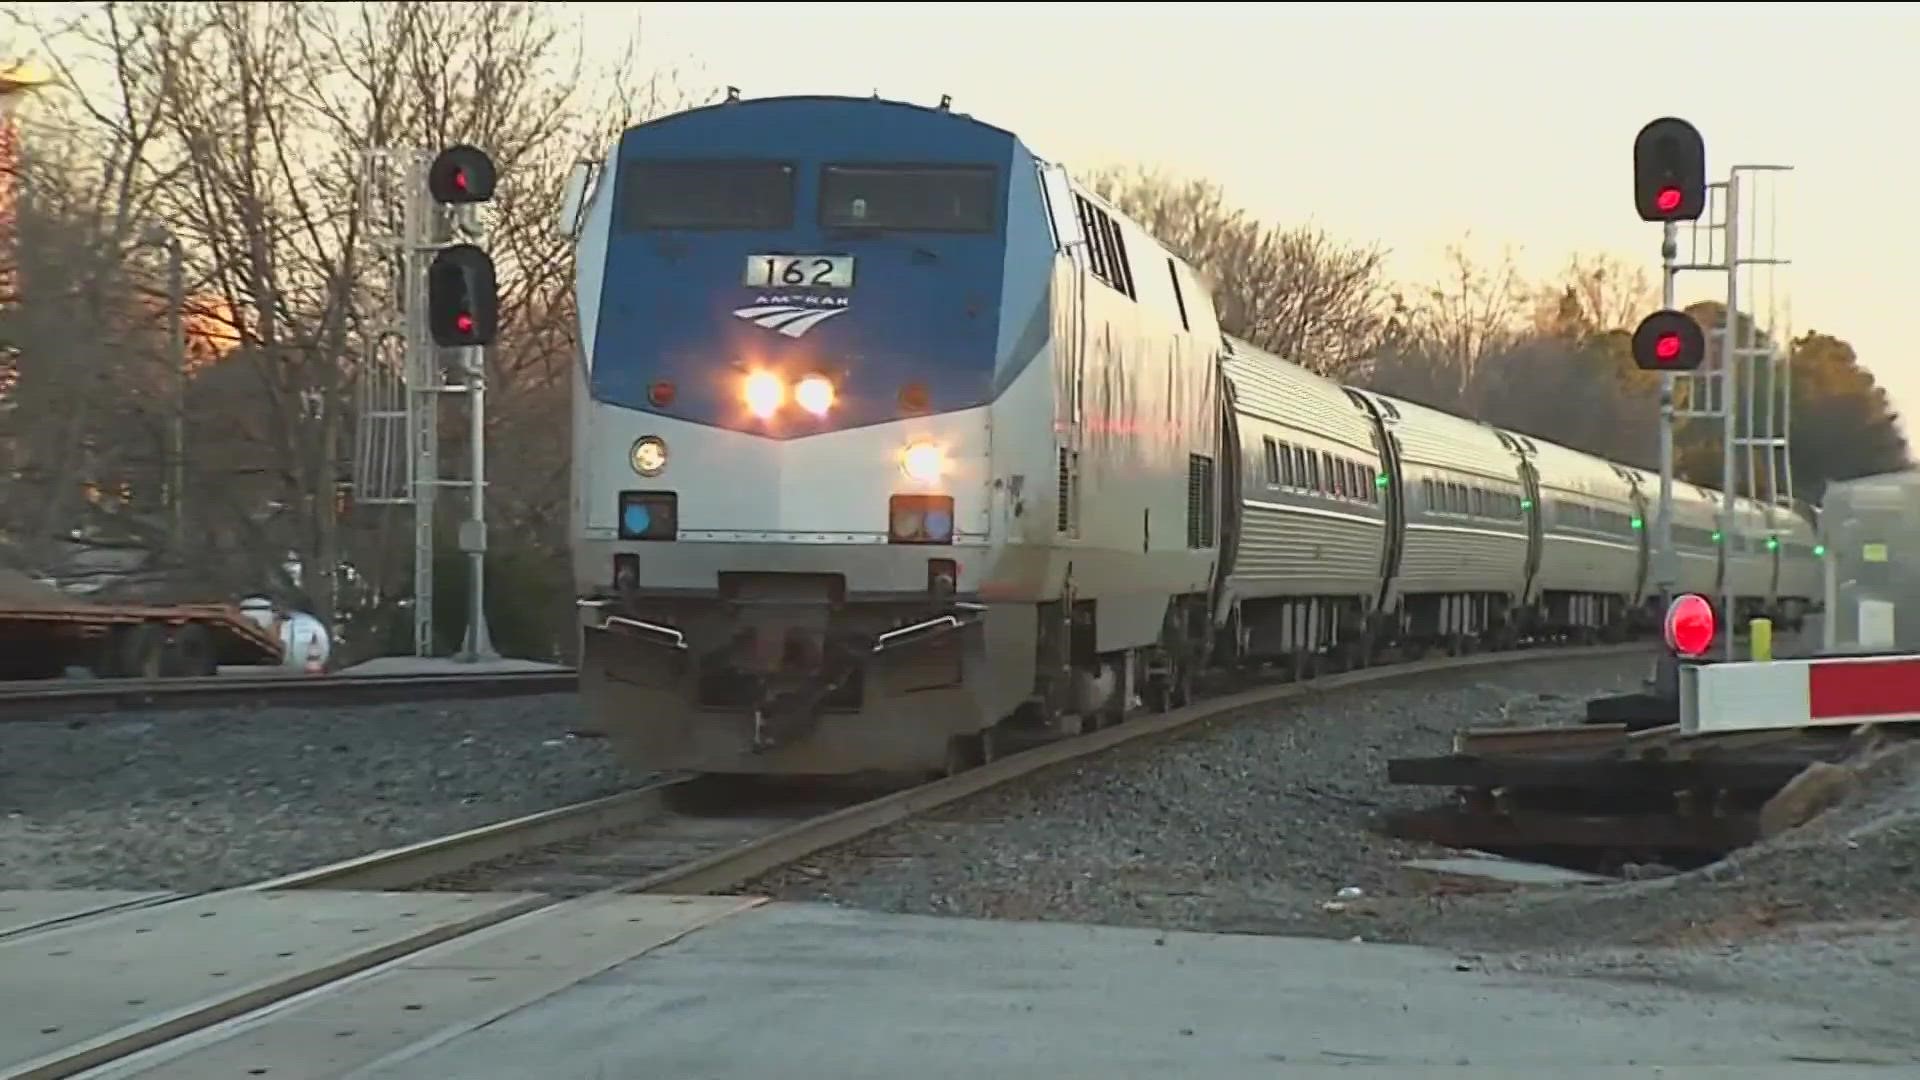 The Northwest Ohio Passenger Rail Association said the first step is to expand lines from Cleveland to Chicago, and then create a line from Cleveland to Cincinnati.